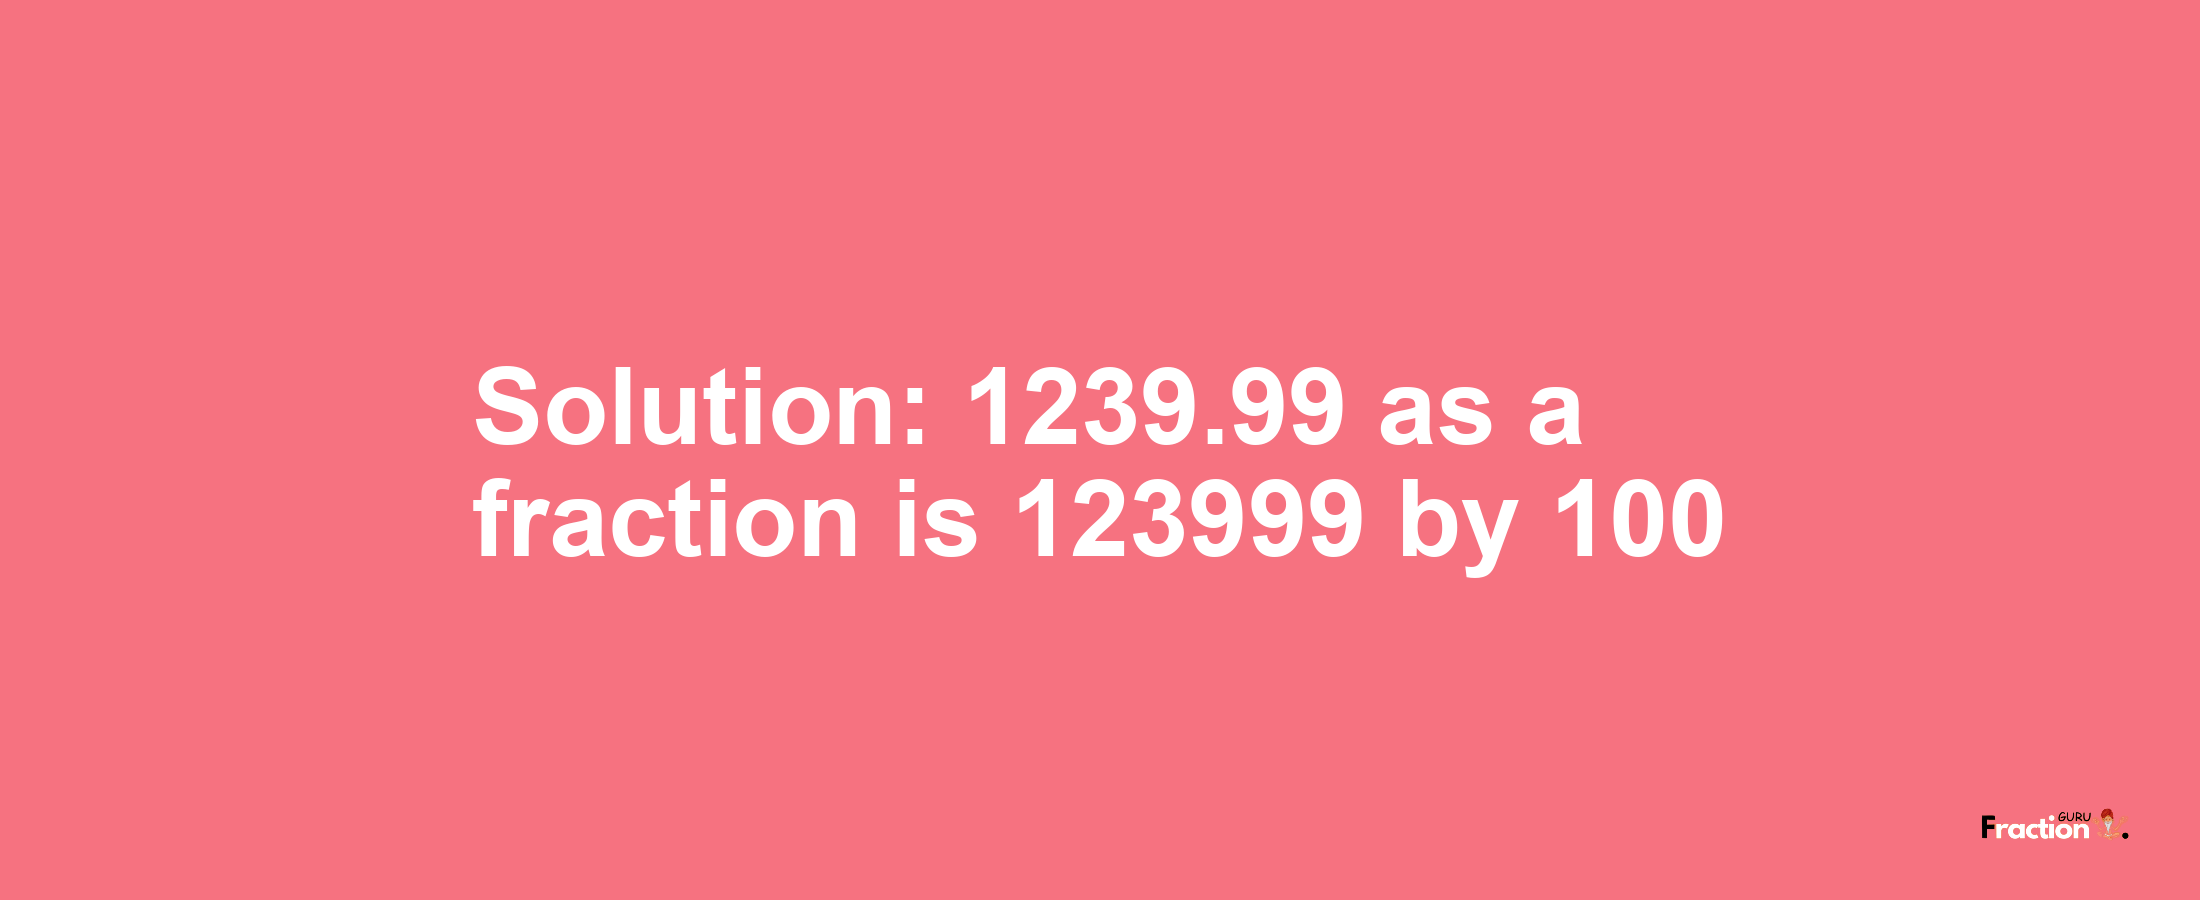 Solution:1239.99 as a fraction is 123999/100